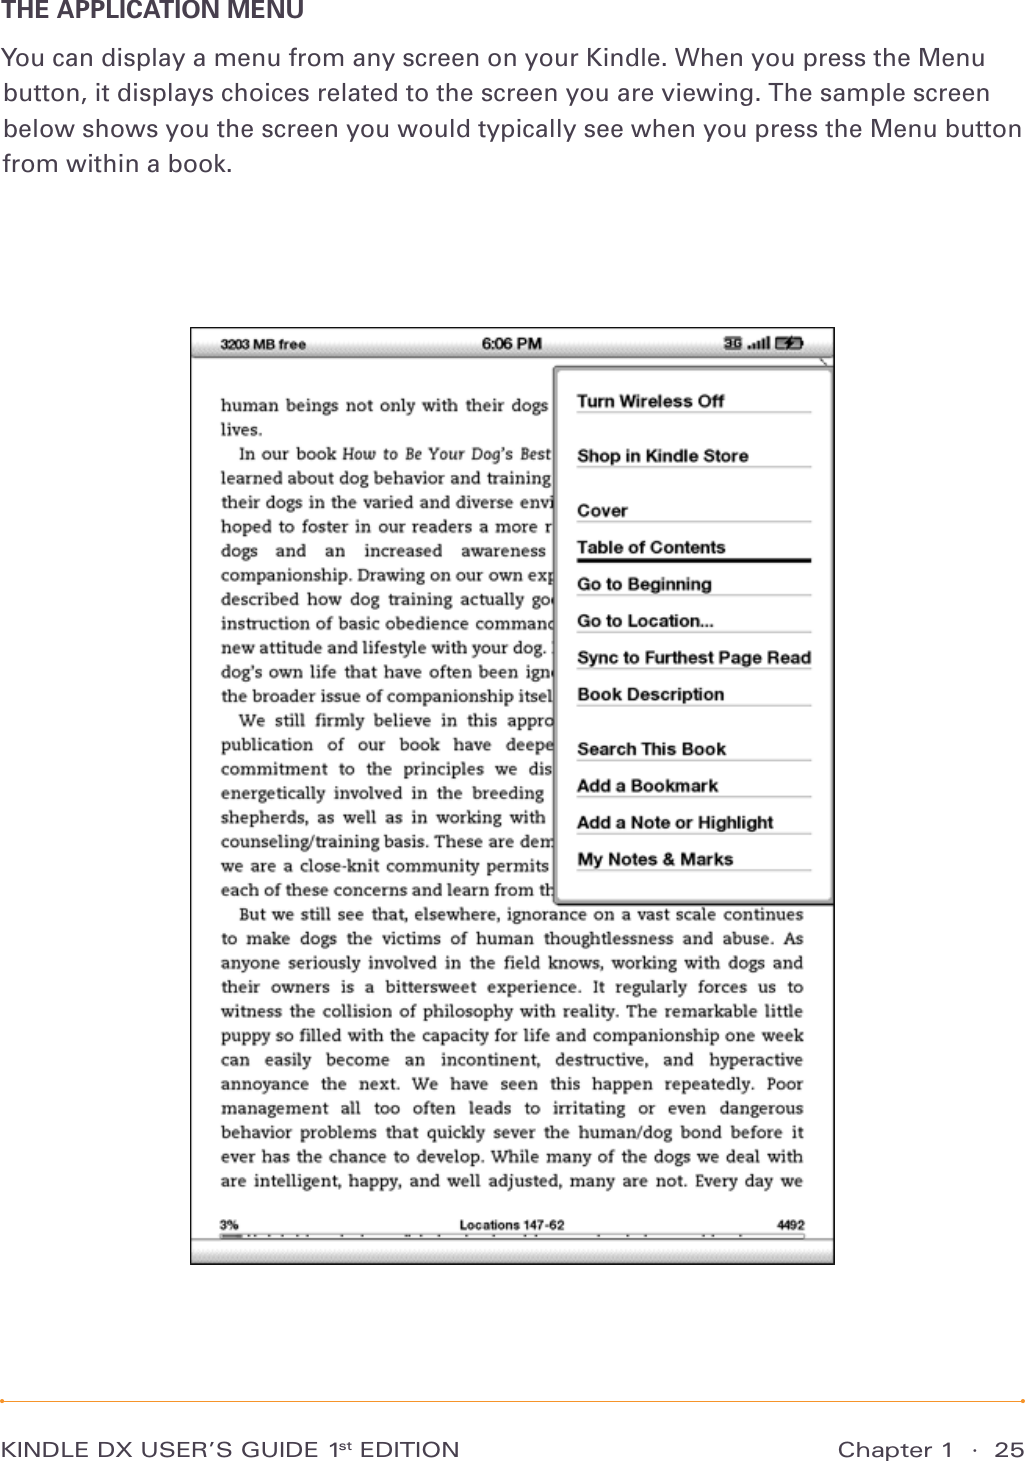 Chapter 1  ·  25KINDLE DX USER’S GUIDE 1st EDITIONTHE APPLICATION MENUYou can display a menu from any screen on your Kindle. When you press the Menu button, it displays choices related to the screen you are viewing. The sample screen below shows you the screen you would typically see when you press the Menu button from within a book.